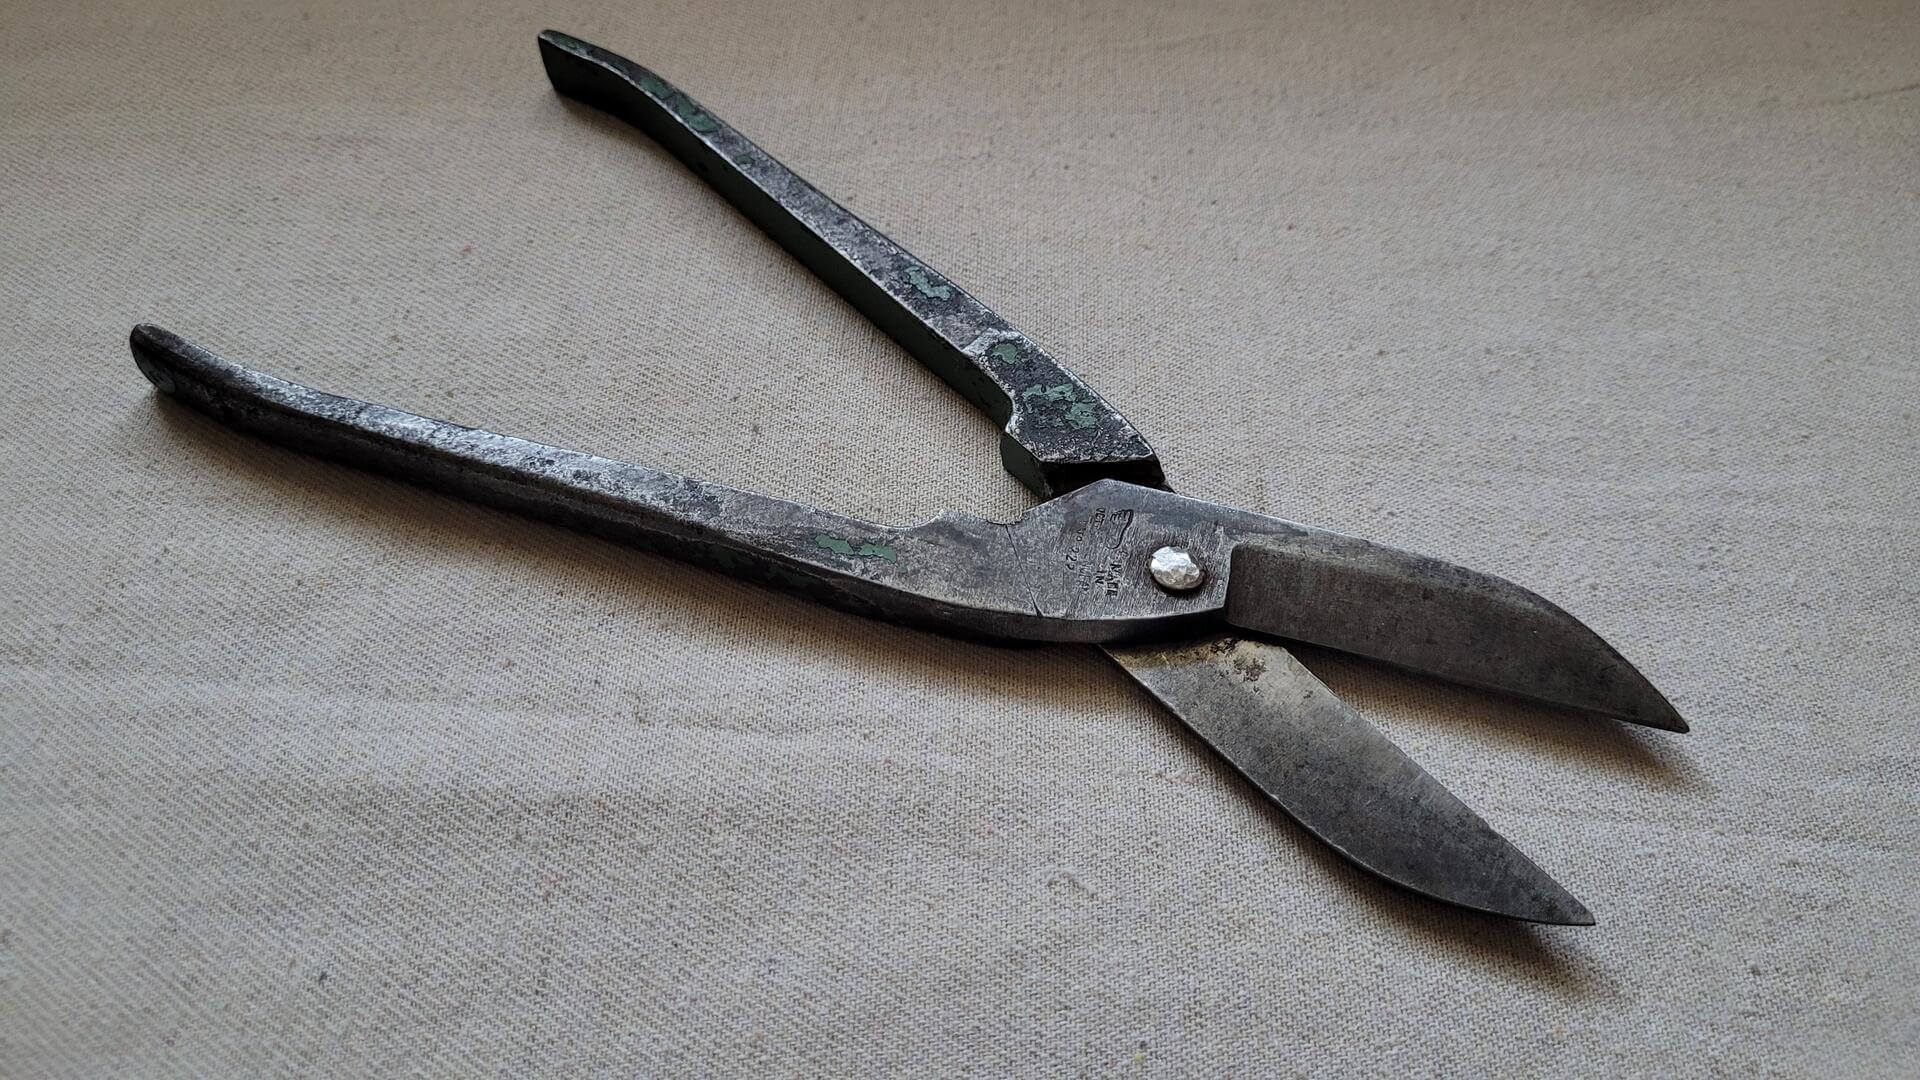 Vintage Footprint No. 220 tin snips and shears with solid clean ergonomic design. Rare antique made in Sheffield England collectible cutting tools ready for metals